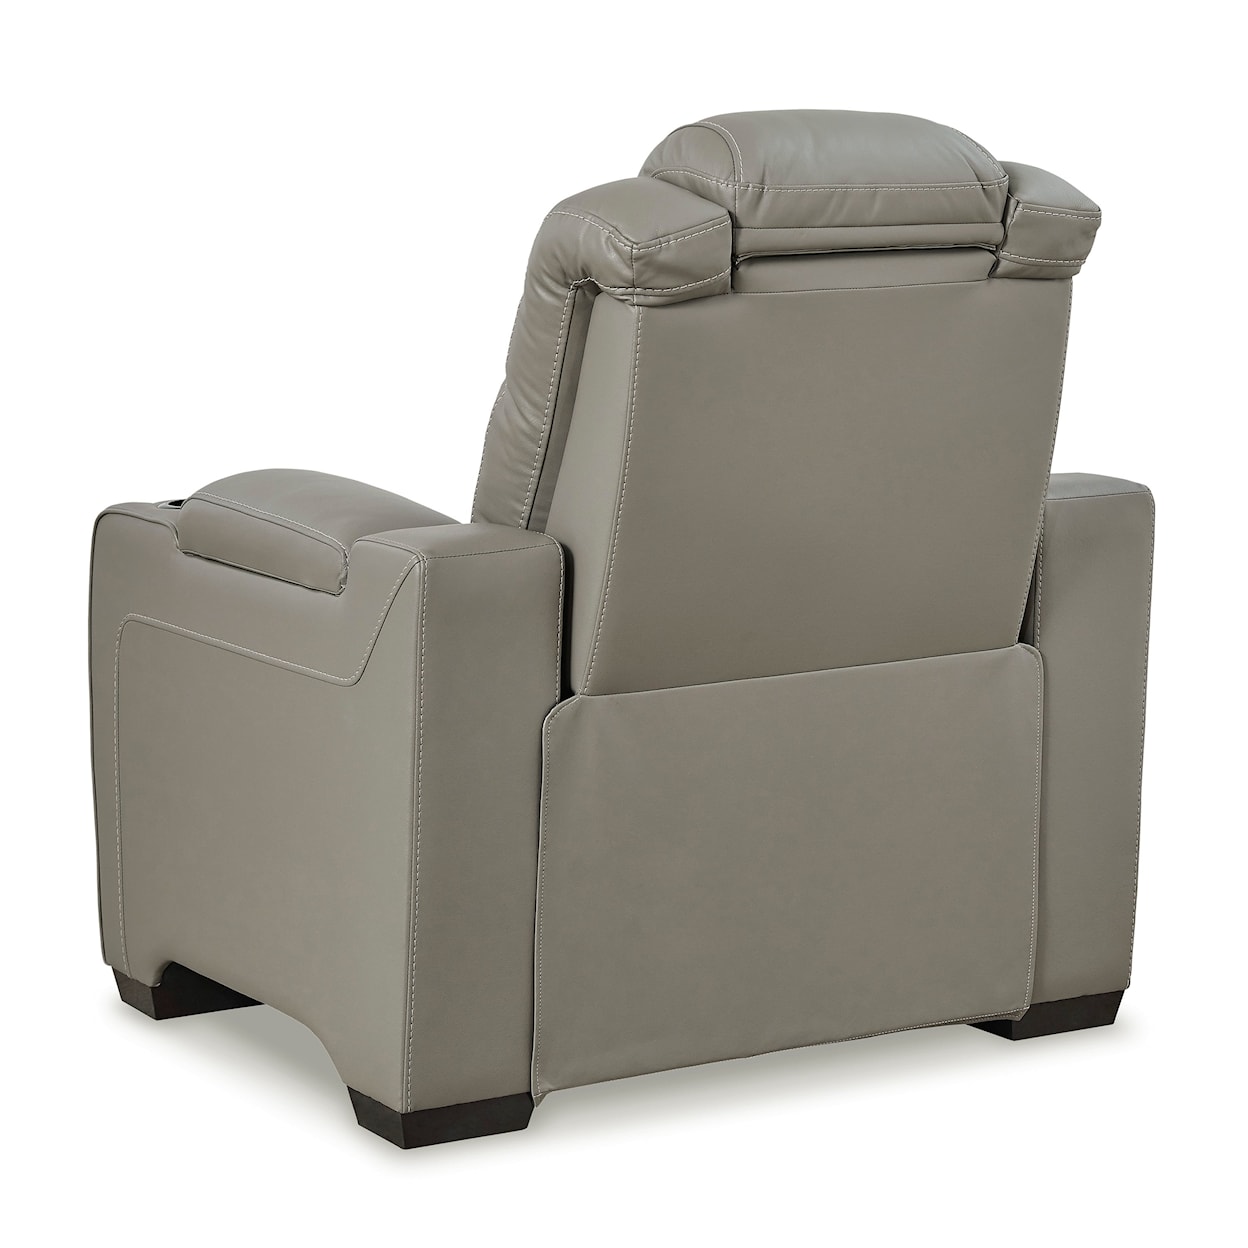 Signature Design by Ashley Backtrack Power Recliner